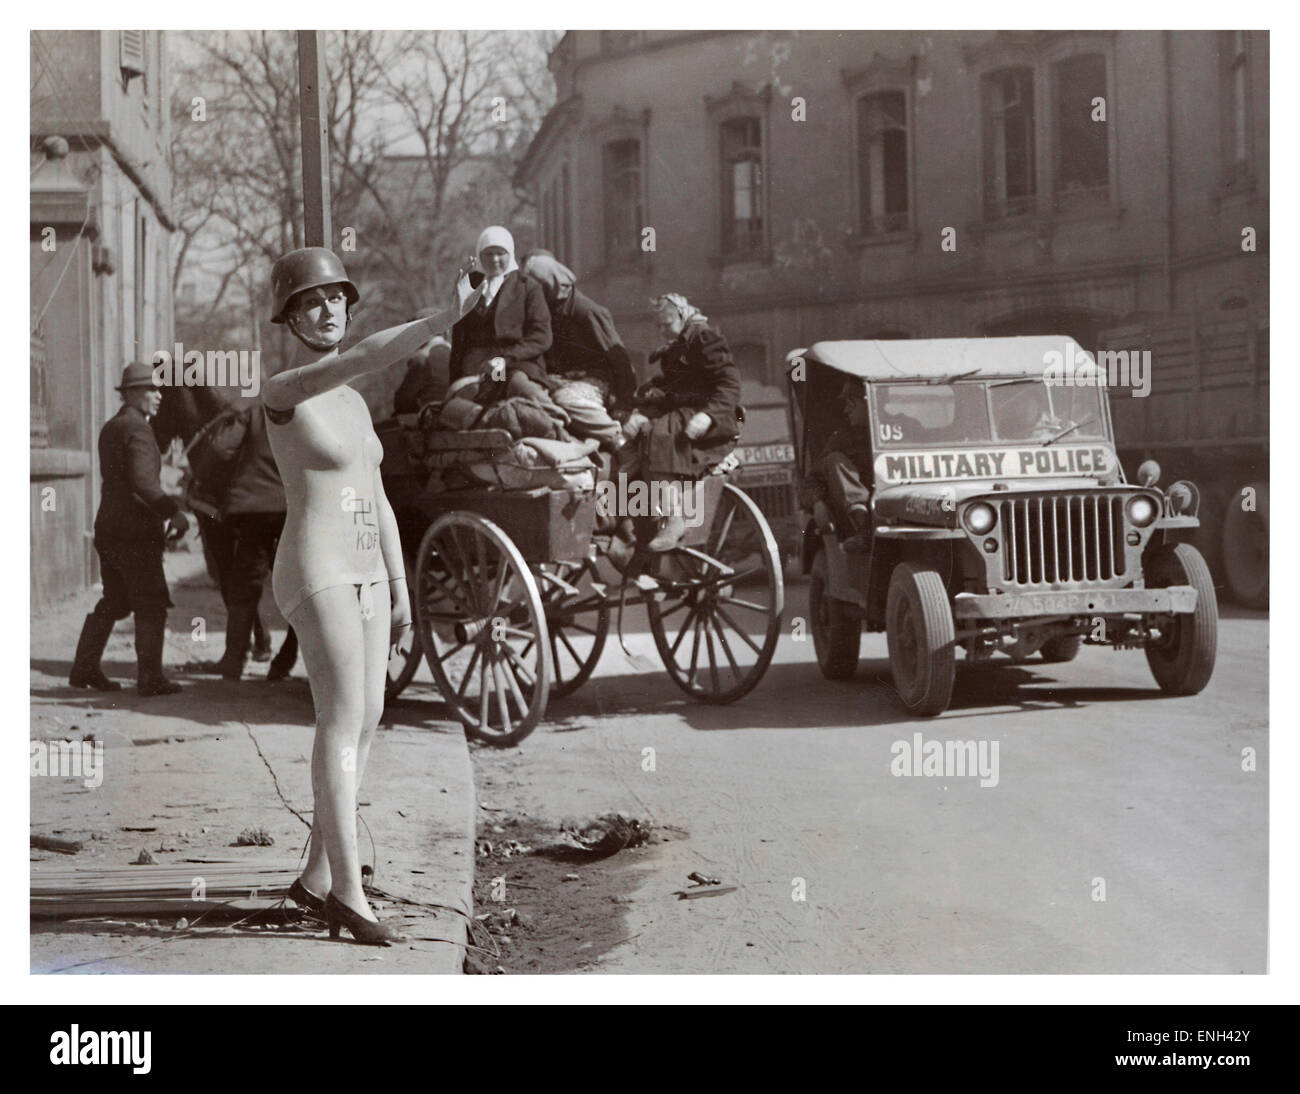 OCCUPIED BERLIN WW2 Dark humour image in post war 1945 Berlin of helmeted shop mannequin giving Hitler salute with American jeep and refugees behind Stock Photo